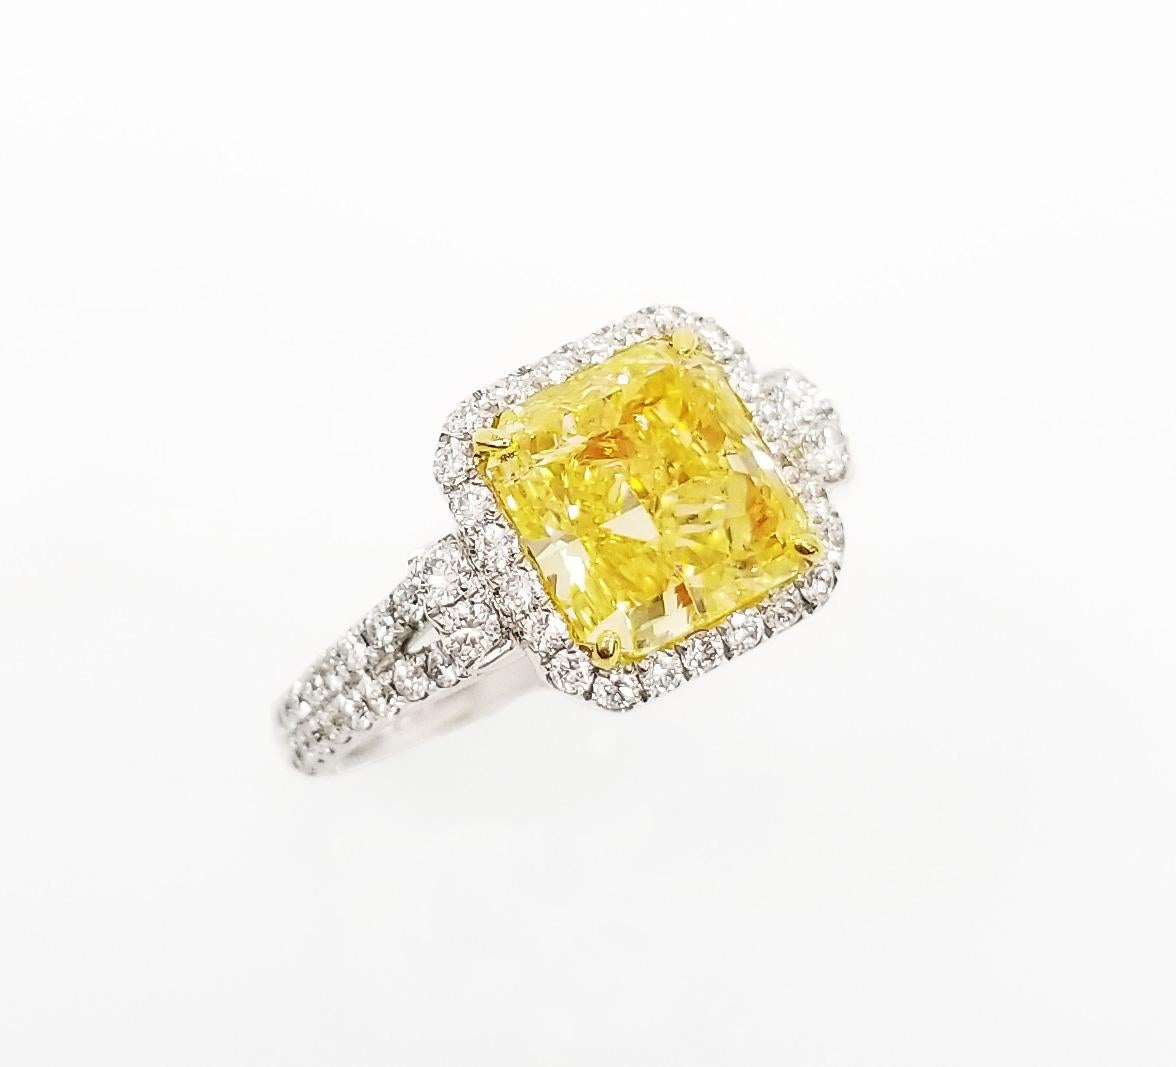 From the Collection of Scarselli, this gorgeous 2.46 carat Natural Fancy Intense Yellow Radiant cut Diamond set in an 18 karat white gold ring with 0.56 total carats of additional  round brilliant diamonds for a clean and sophisticated look. This